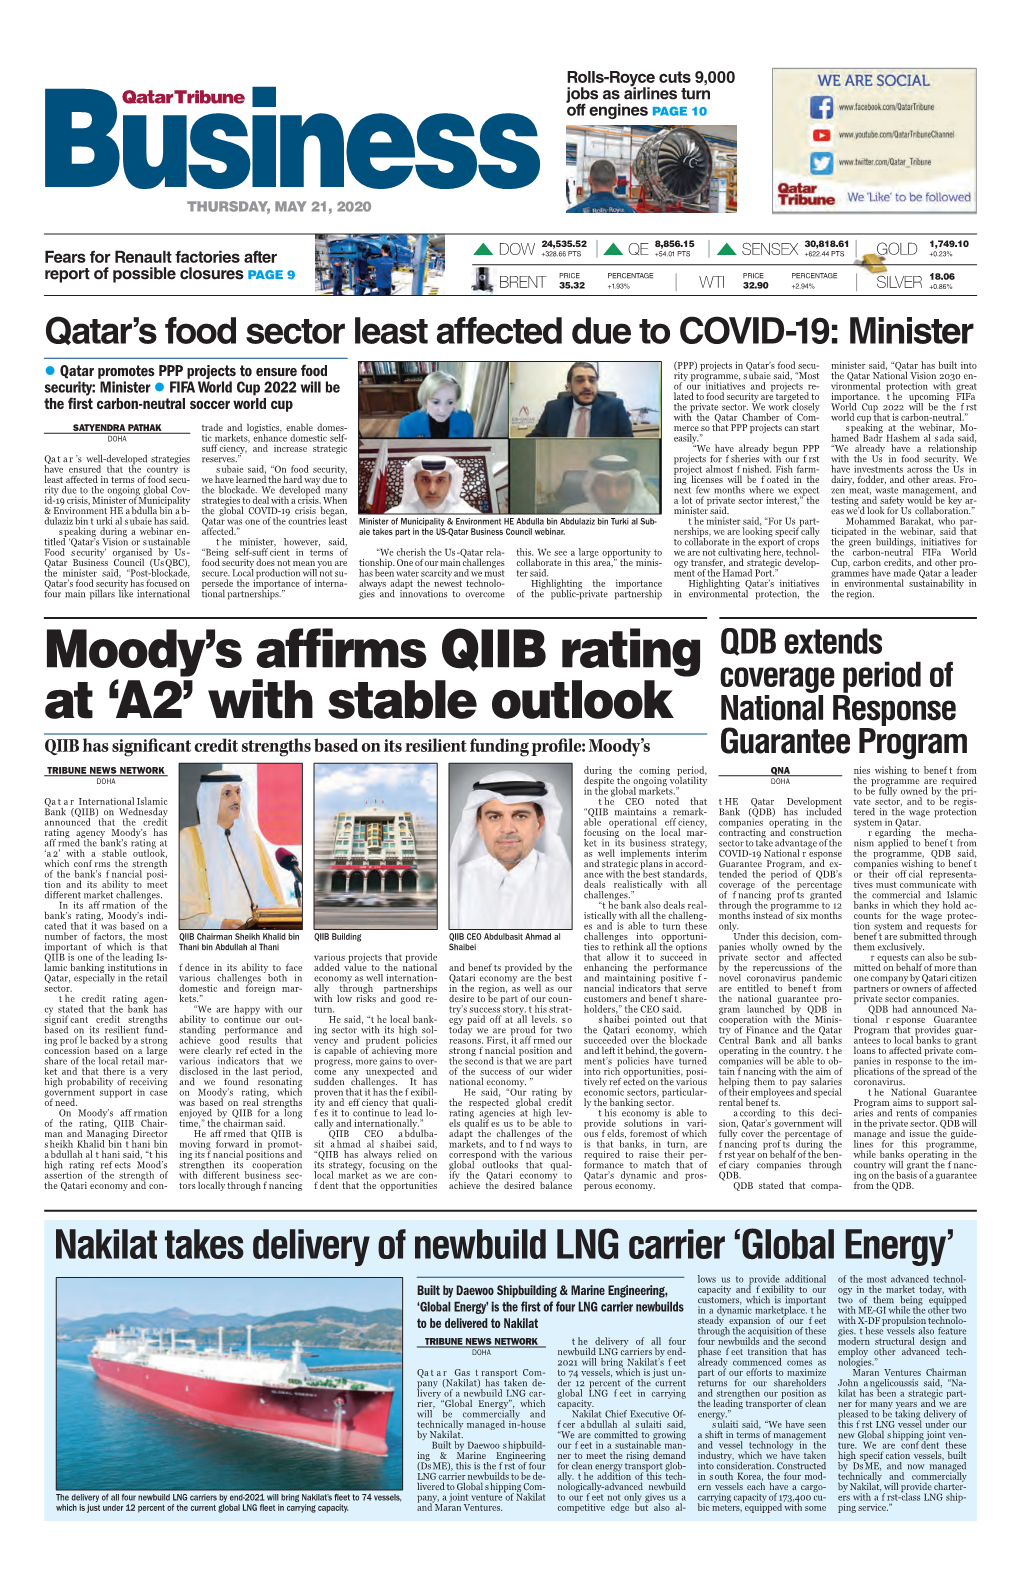 Moody's Affirms QIIB Rating at 'A2' with Stable Outlook